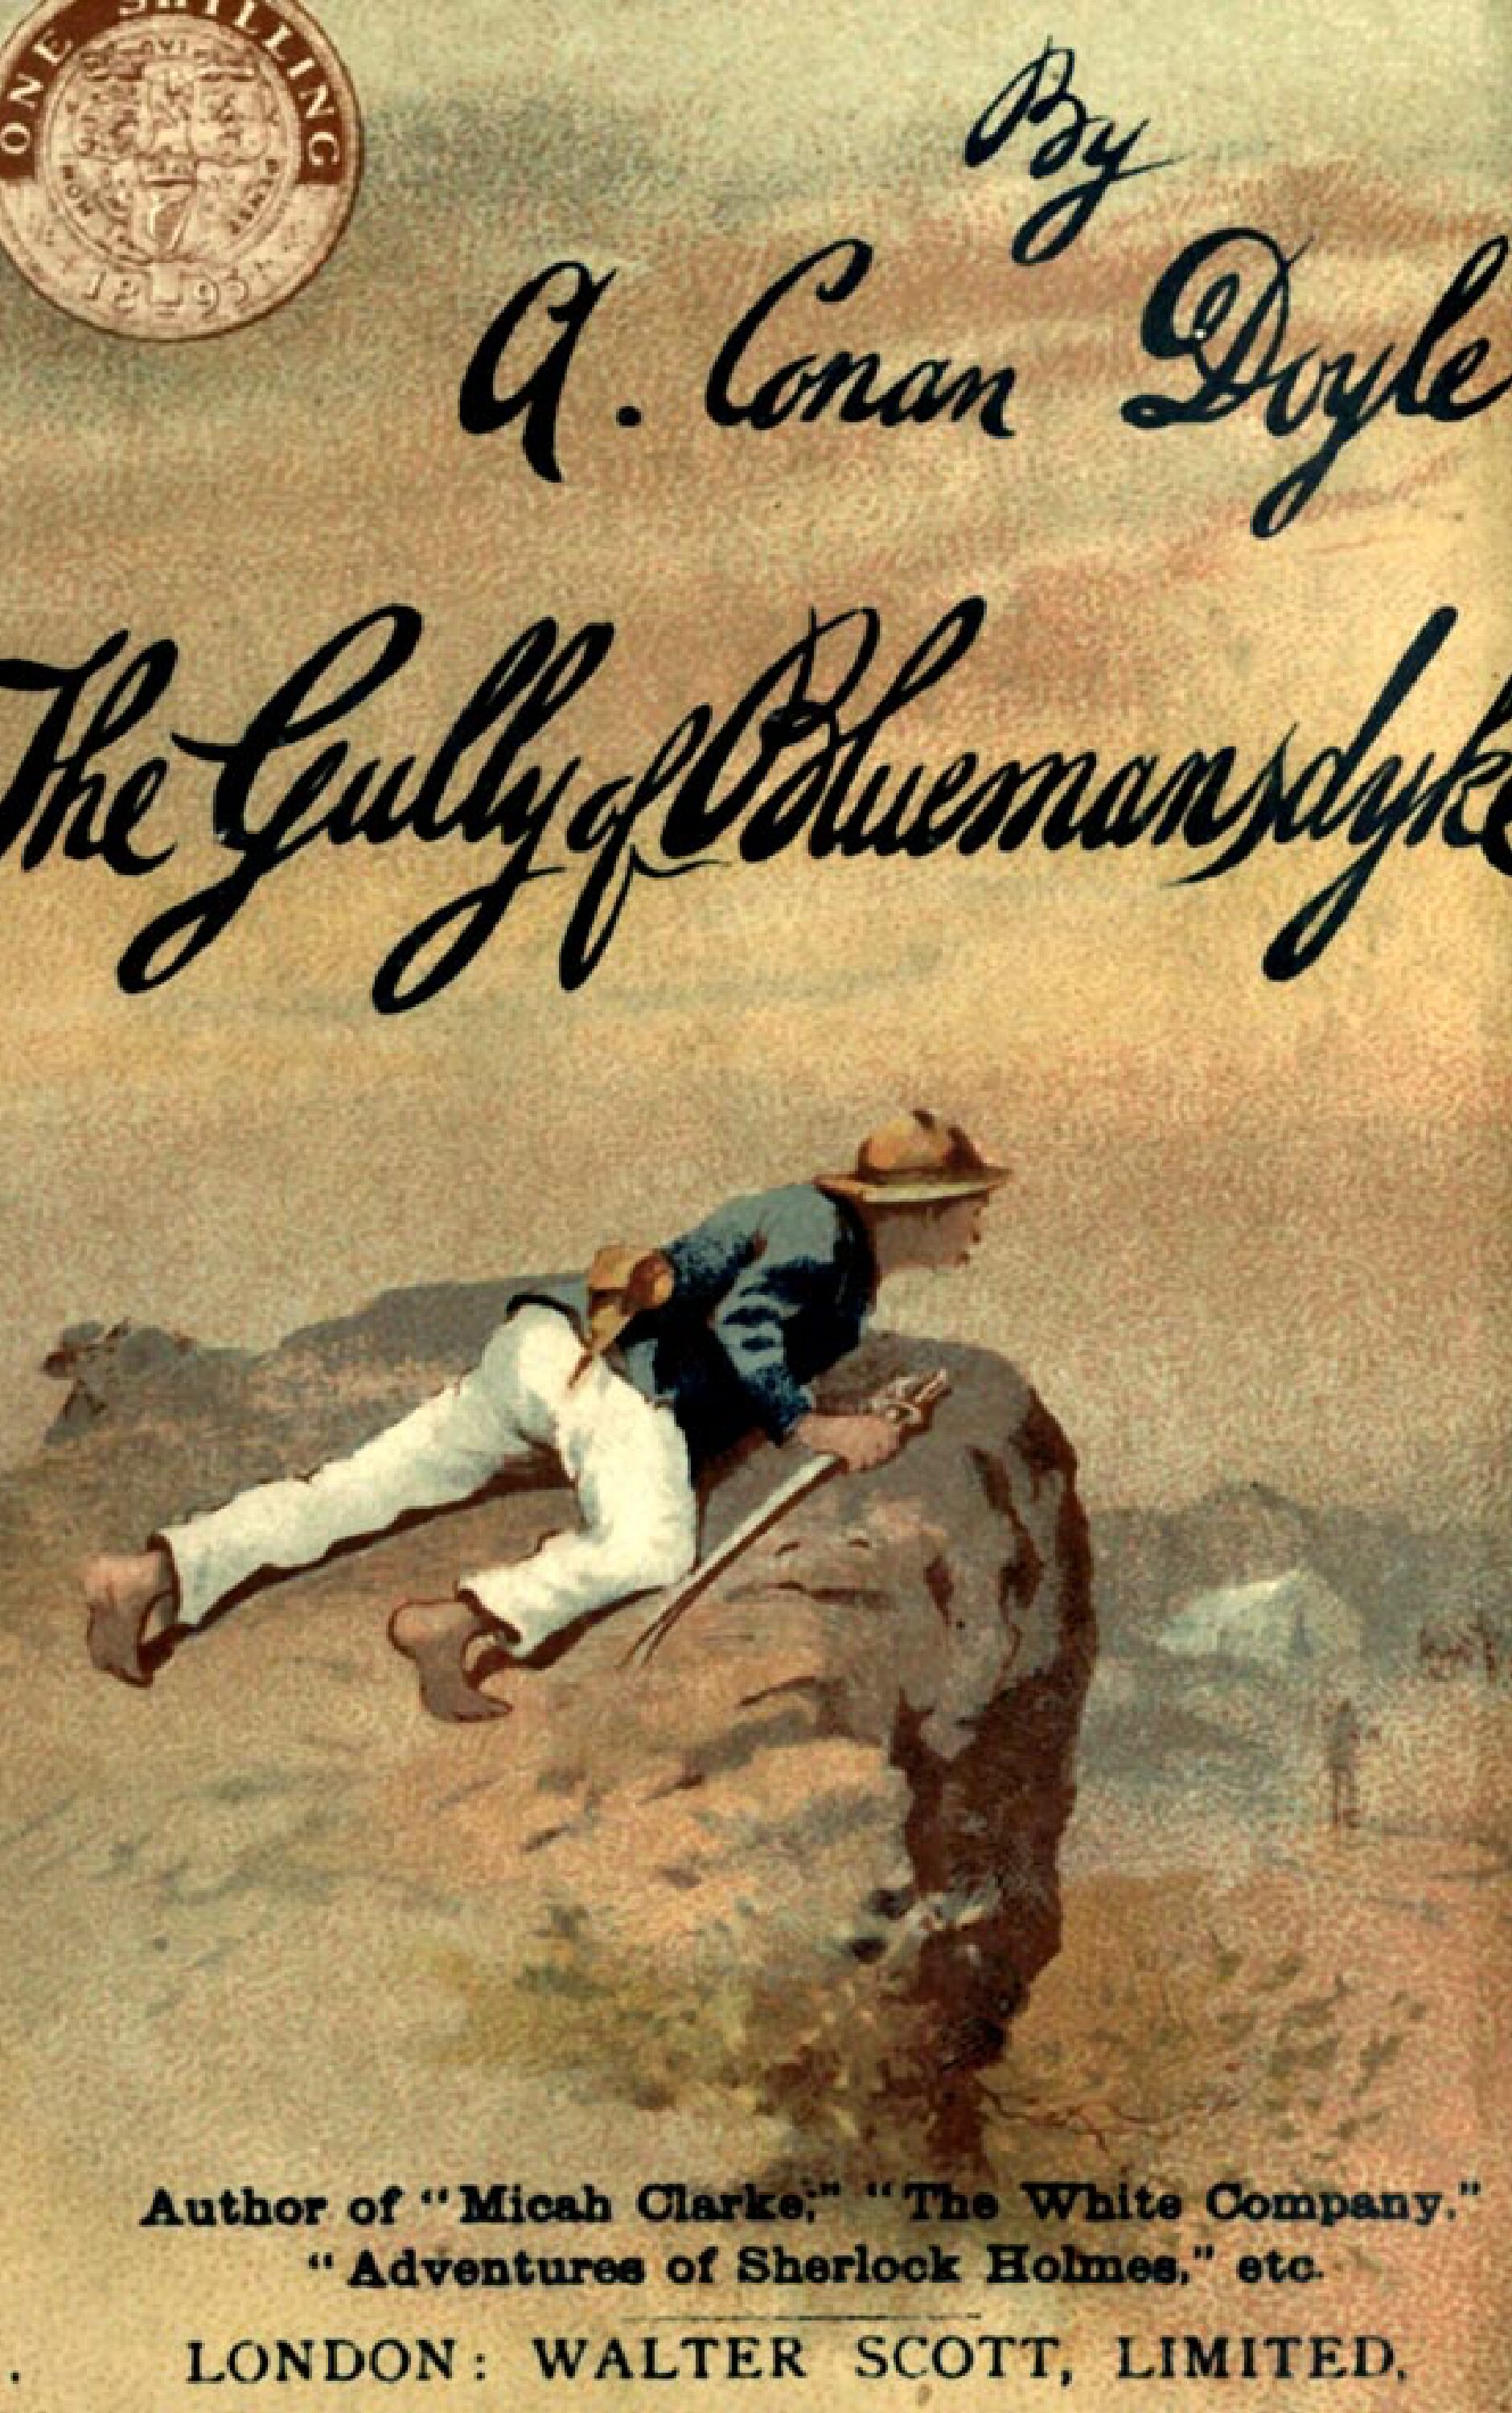 Book Cover: The Gully of Bluemansdyk